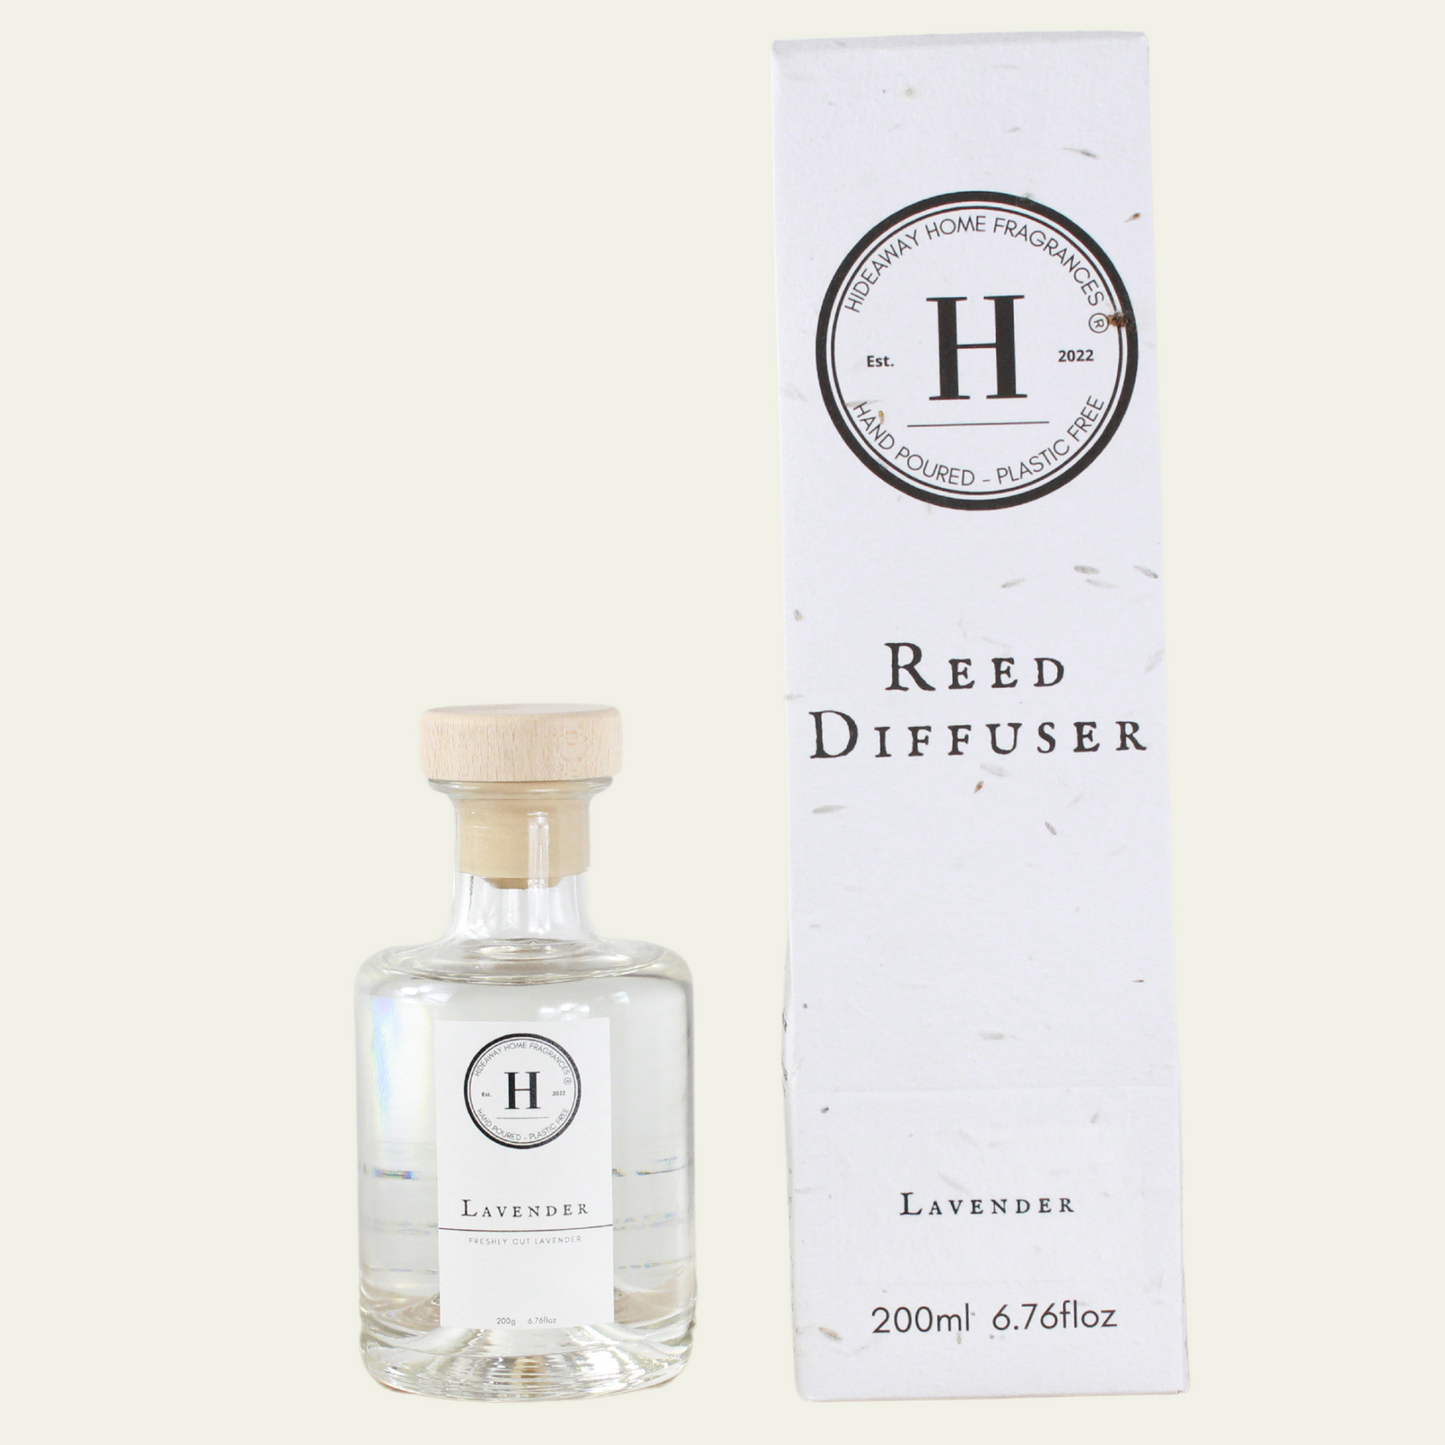 200ml Lavender Reed Diffuser - Hideaway Home Fragrances